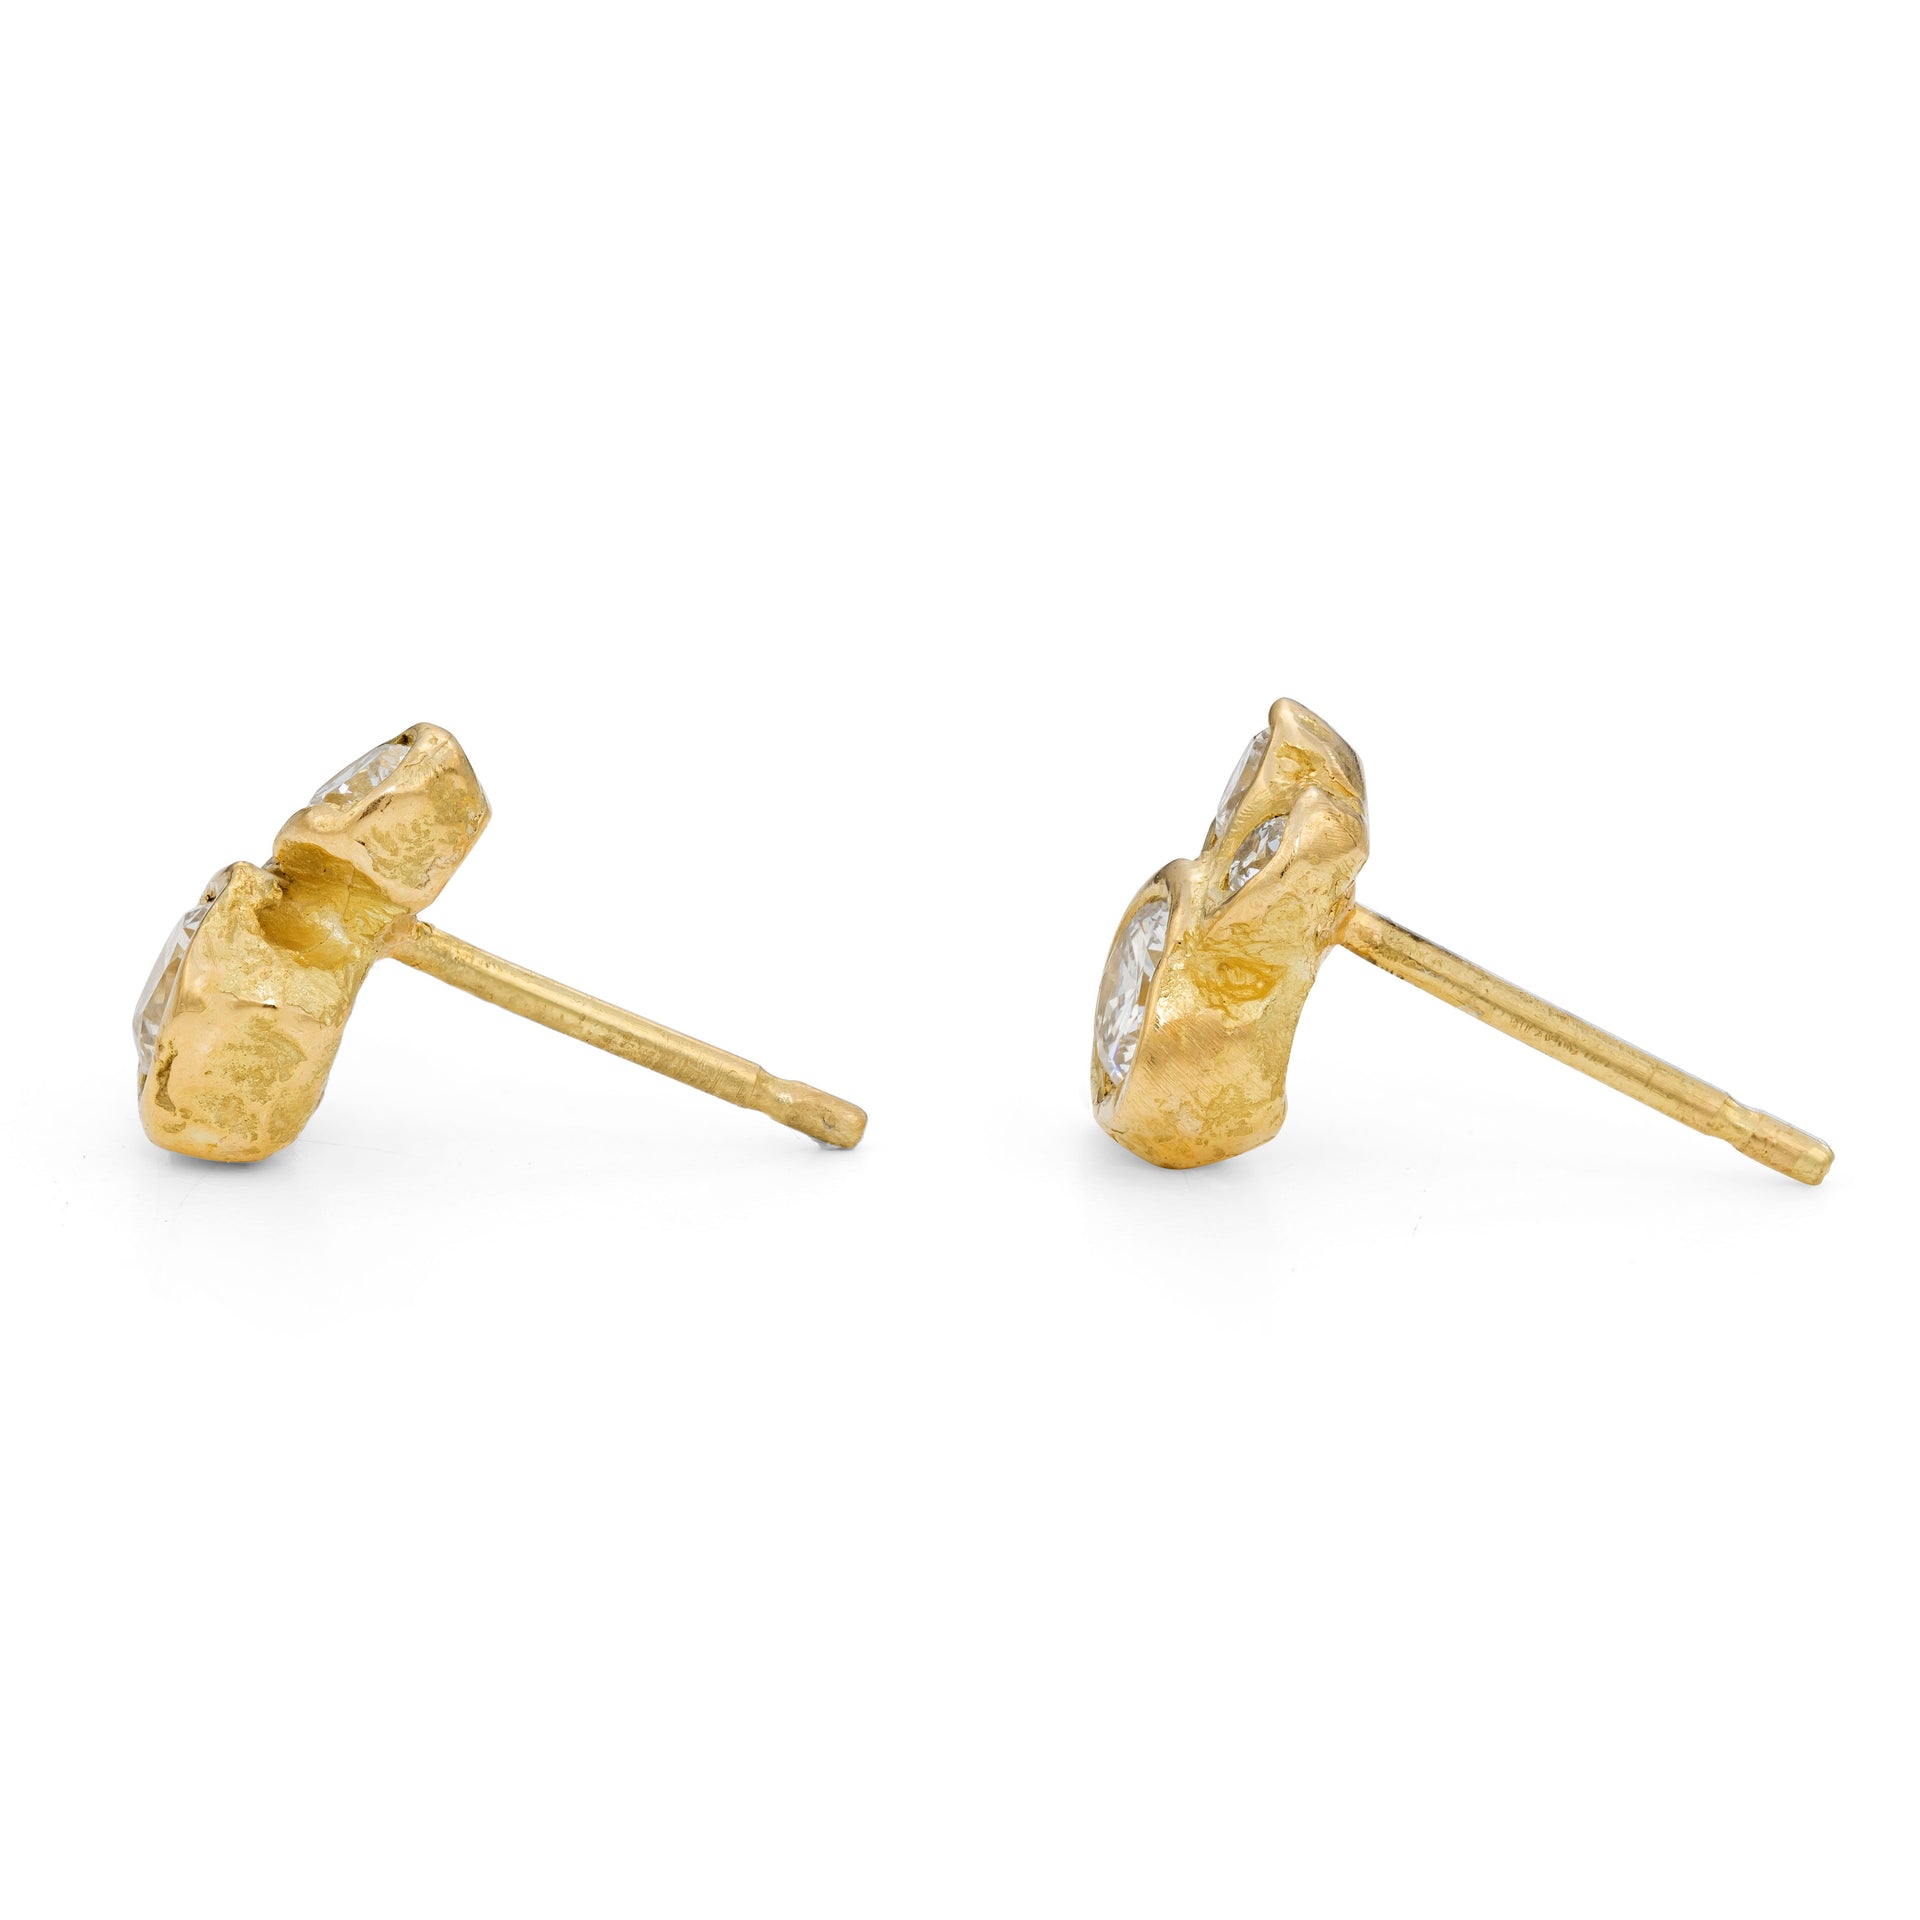 18ct recycled yellow gold stud earrings, with clusters of natural diamonds. Made in Emily Nixon's Cornish Jewellery Studio.